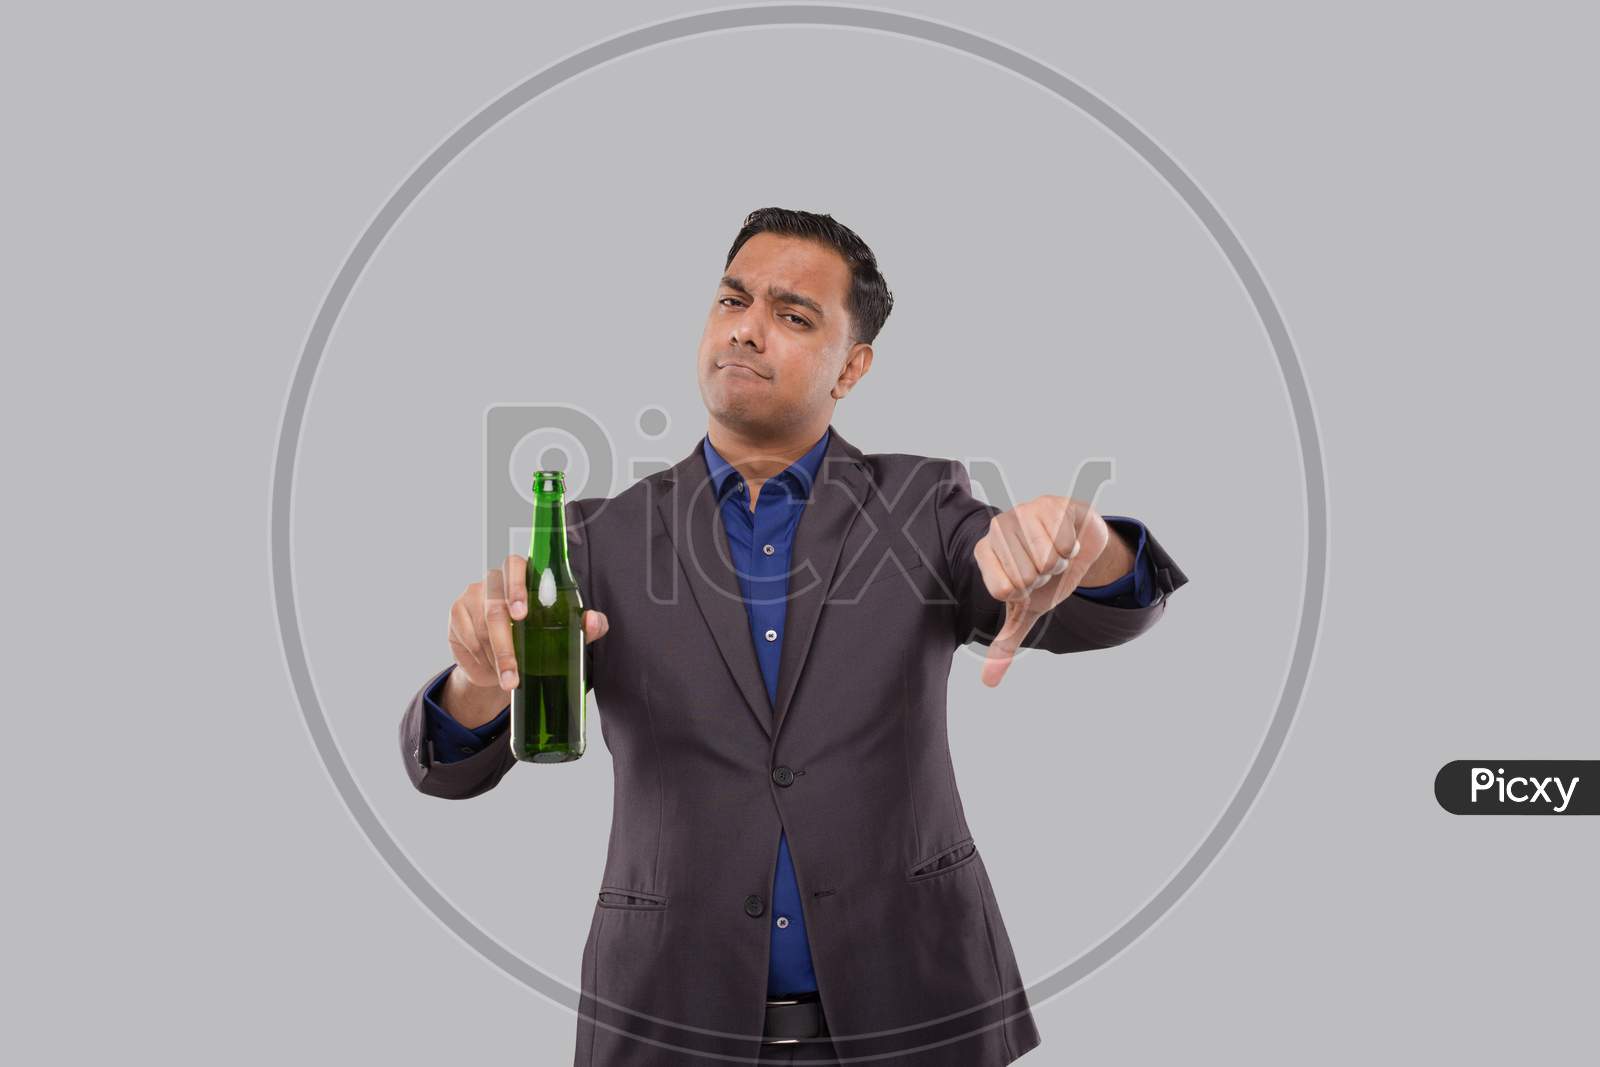 Businessman Holding Beer Bottle Showing Thumb Down. Indian Business Man With Beer Bottle In Hand.